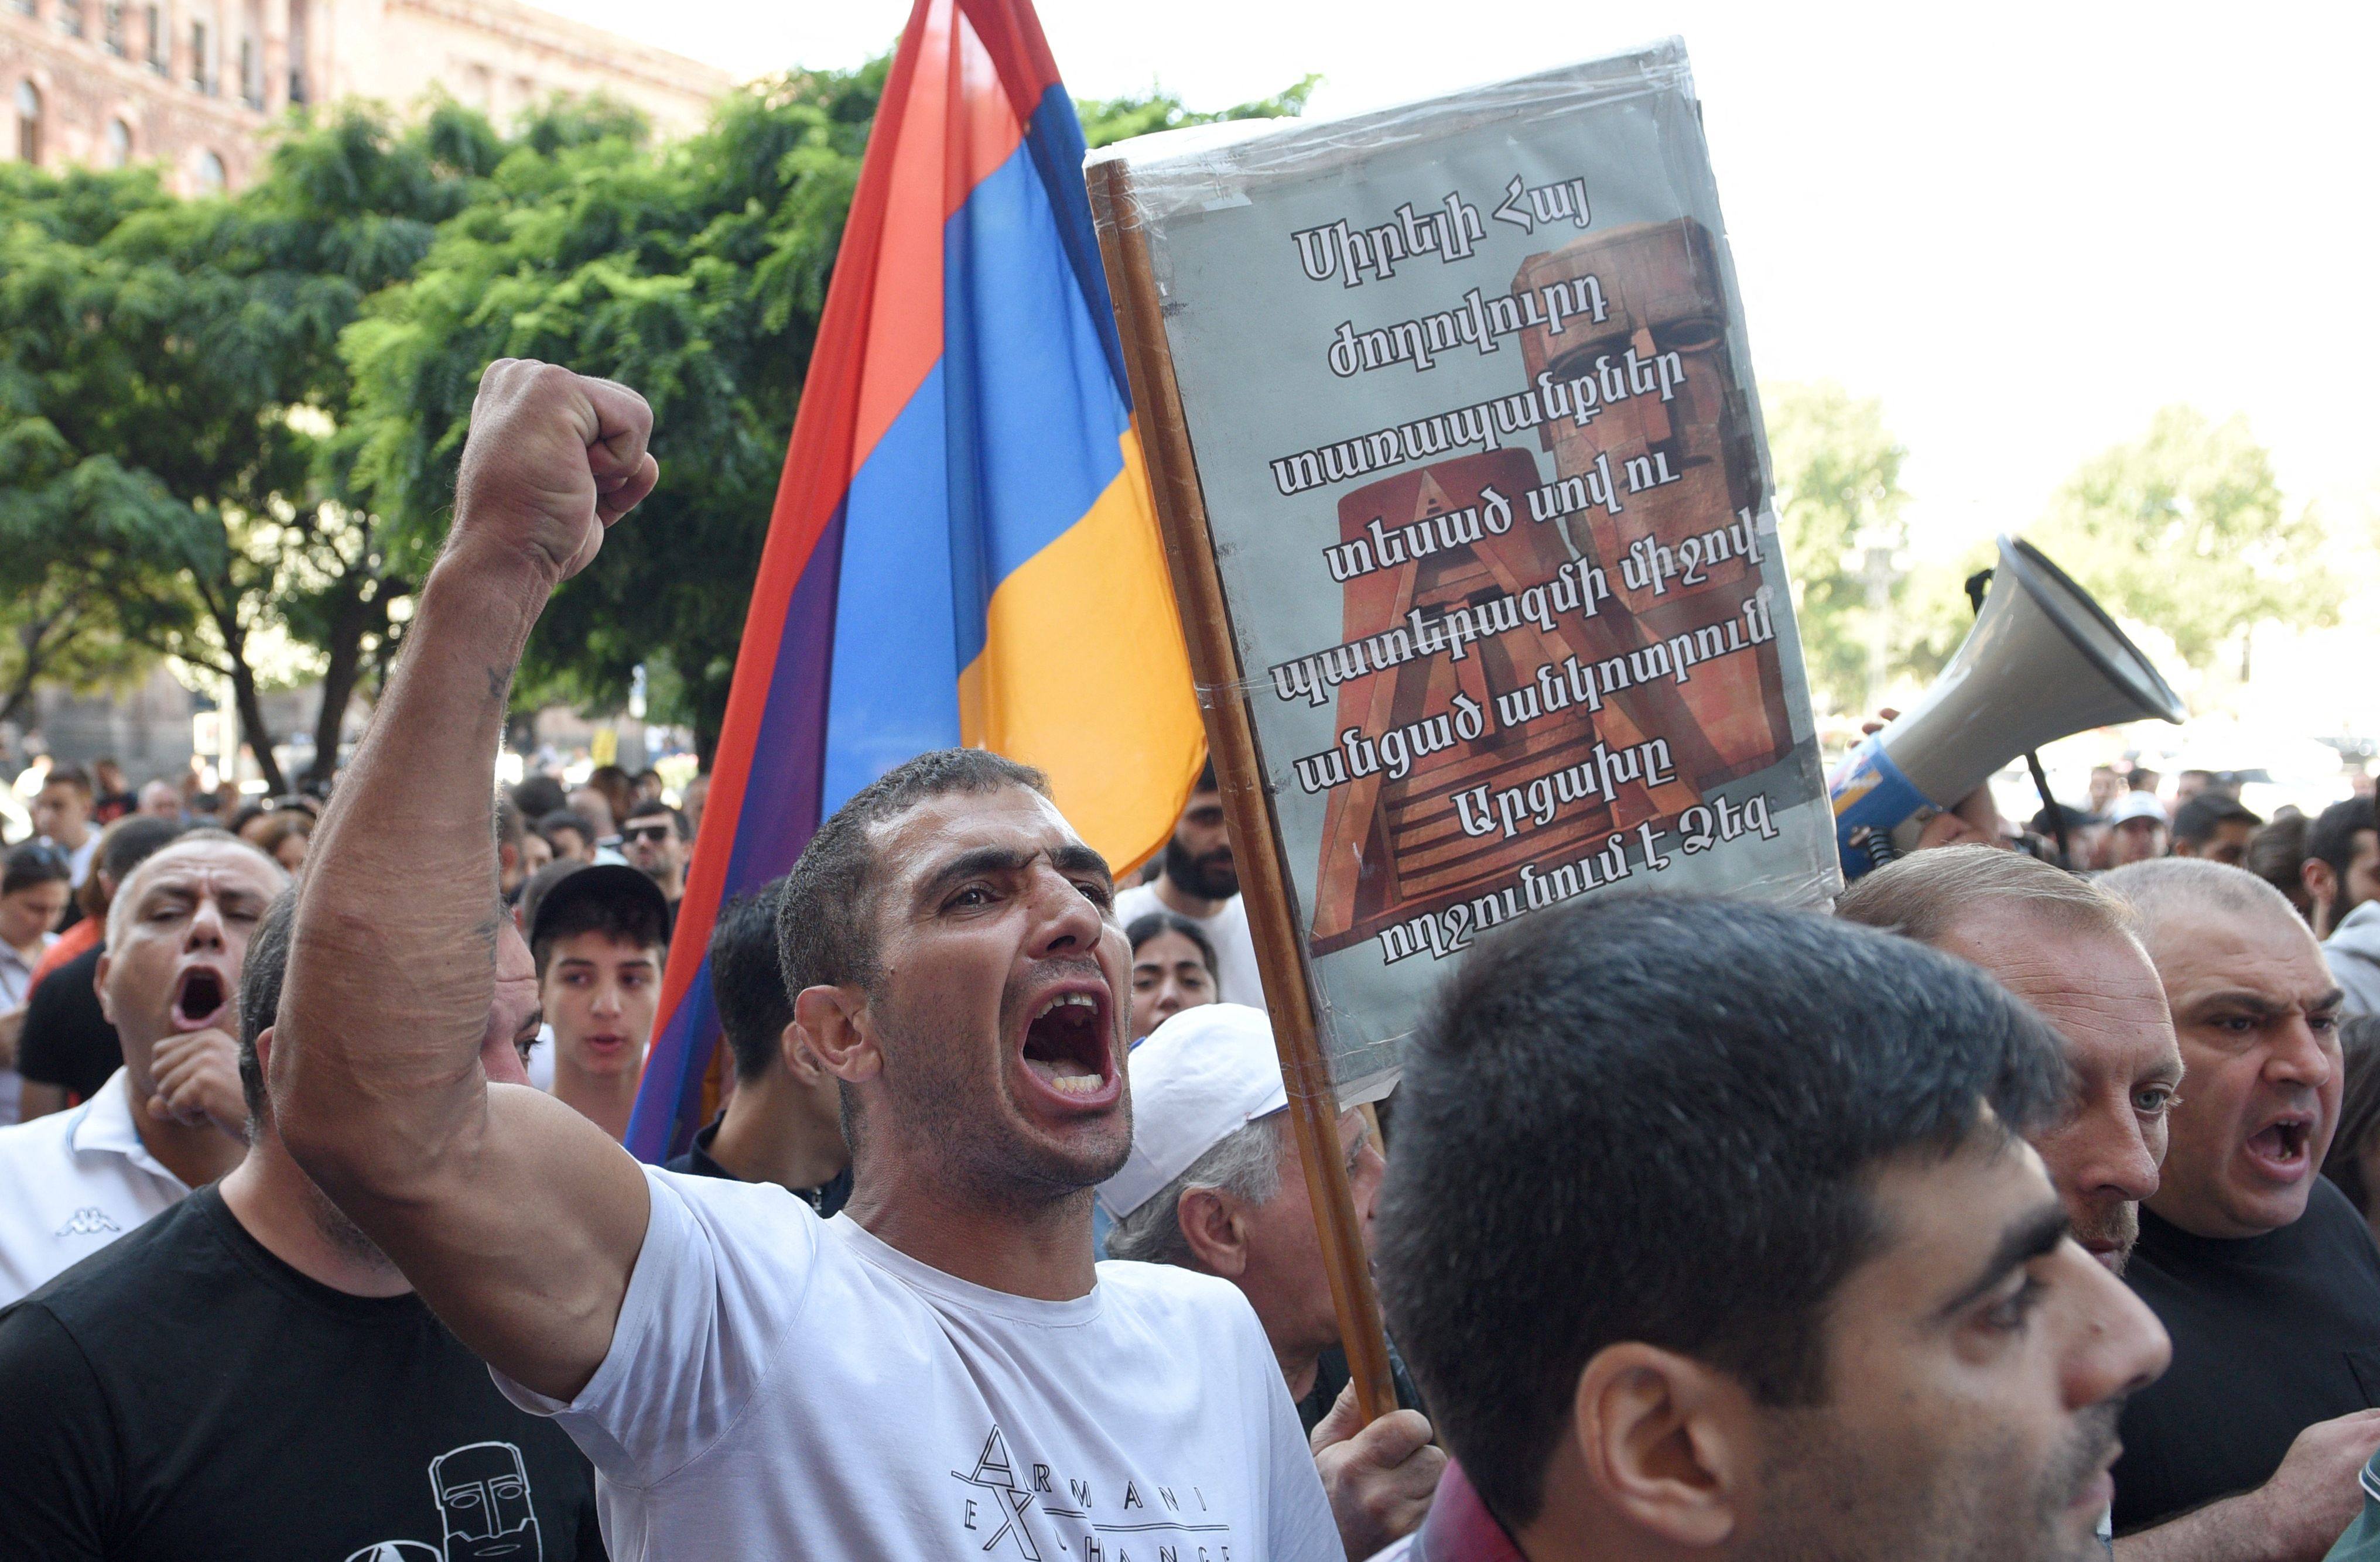 People take part in an anti-government rally in downtown Yerevan in Armenia on Friday, following Azerbaijani military operations against Armenian separatist forces in Nagorno-Karabakh. Photo: AFP